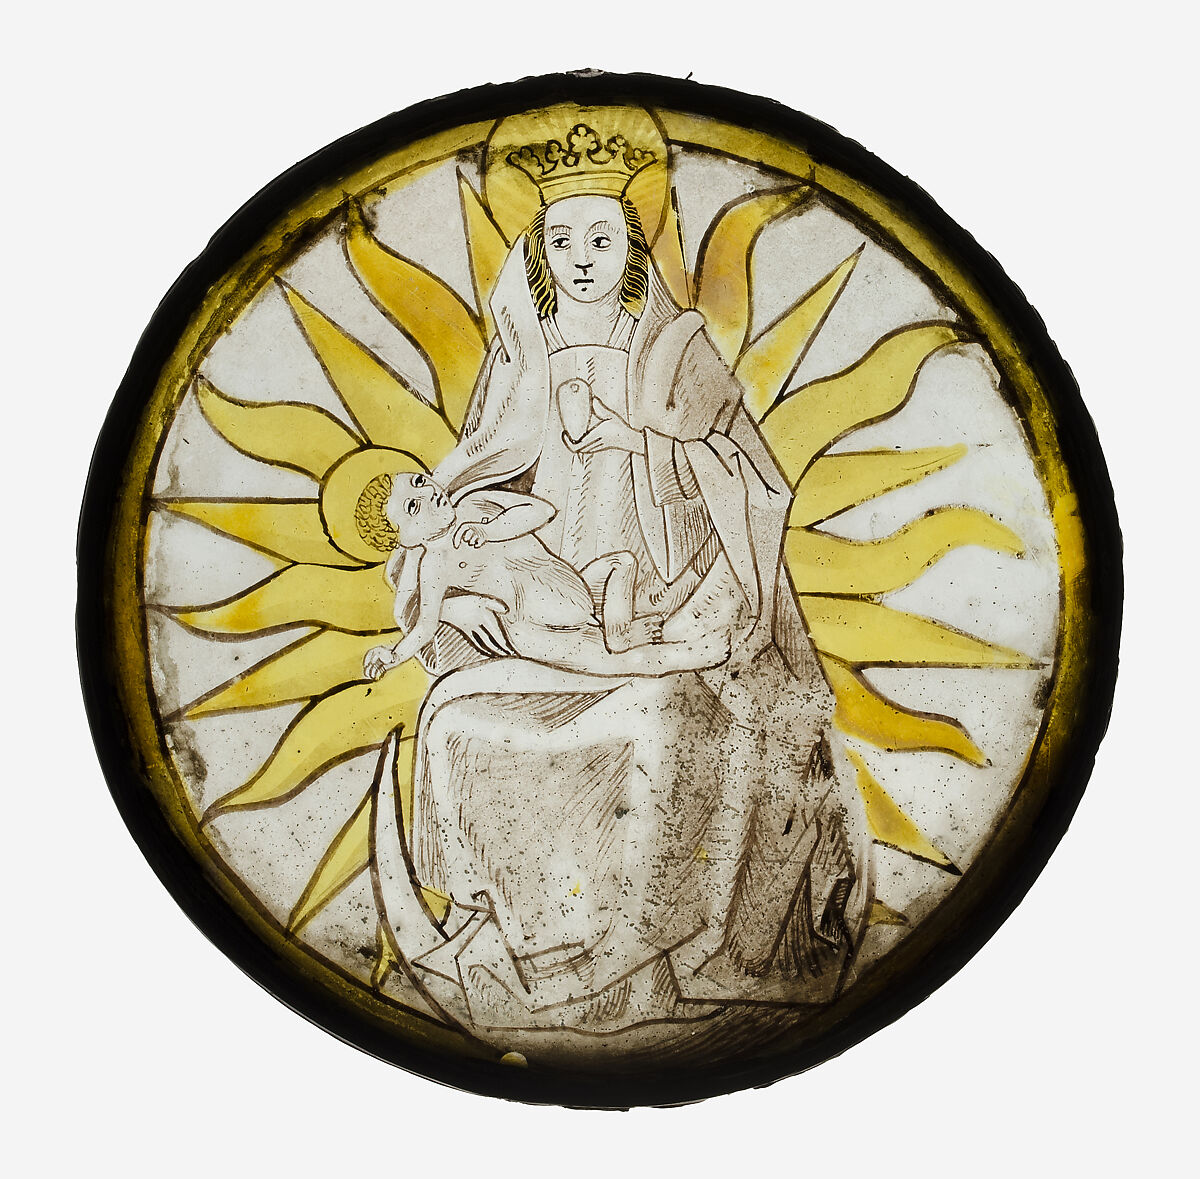 Roundel with the Virgin and Child, Colorless glass, silver stain, vitreous paint, German 